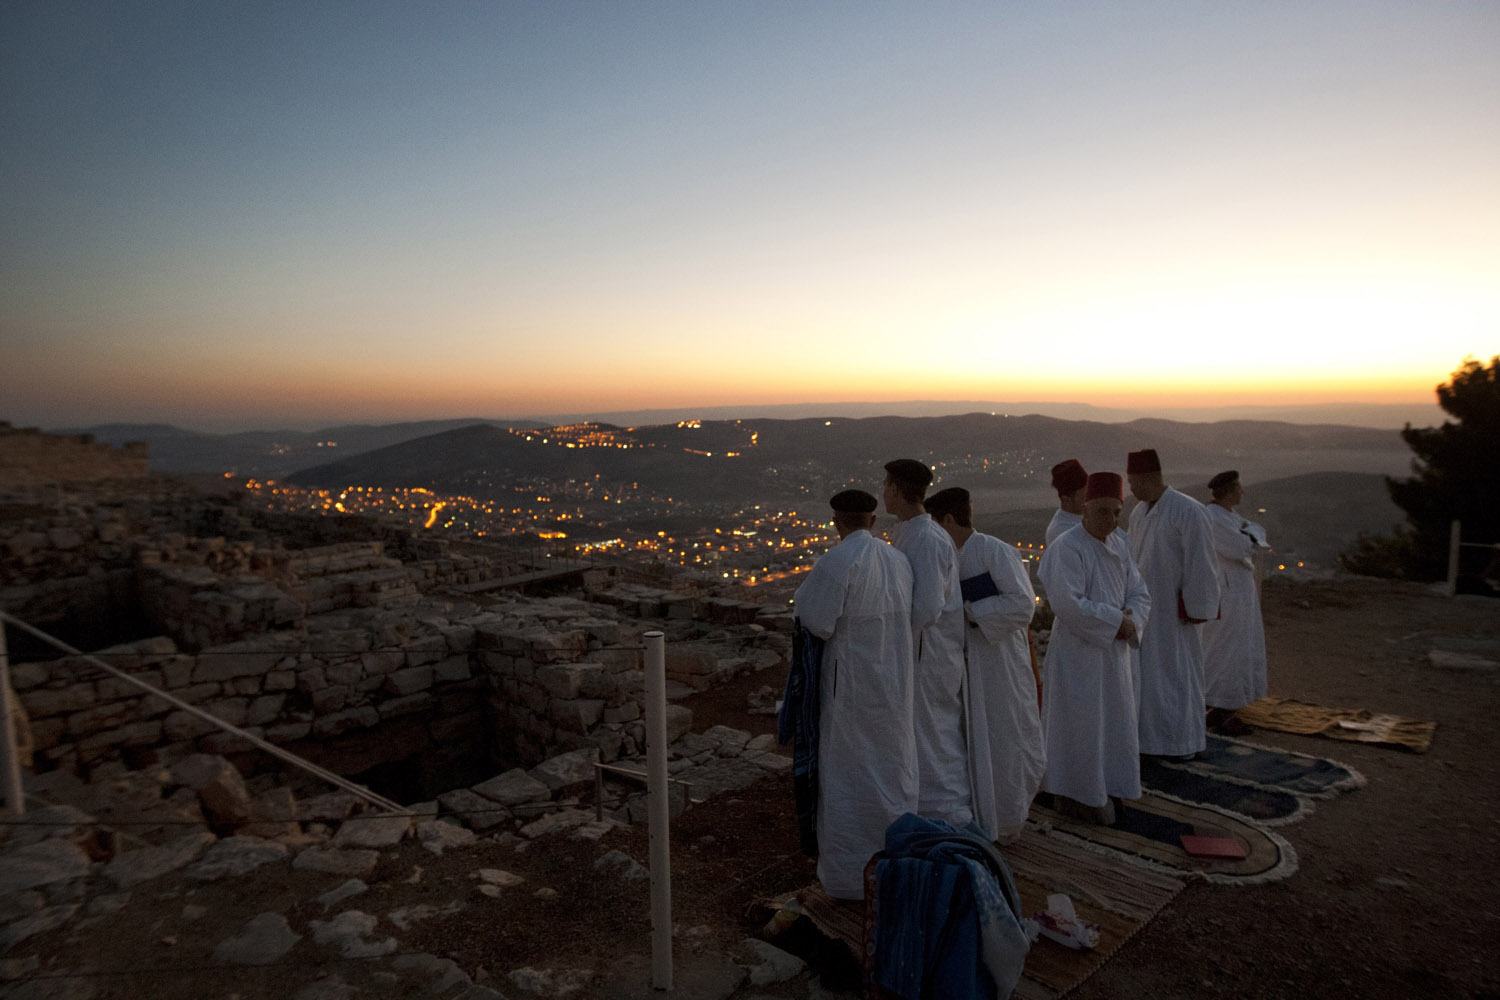 Image: Oct. 29, 2012. Members of the ancient Samaritan community, pray during the pilgrimage for the holy day of the Tabernacles or Sukkot at the religion's holiest site on the top of Mount Gerizim near the West Bank town of Nablus.